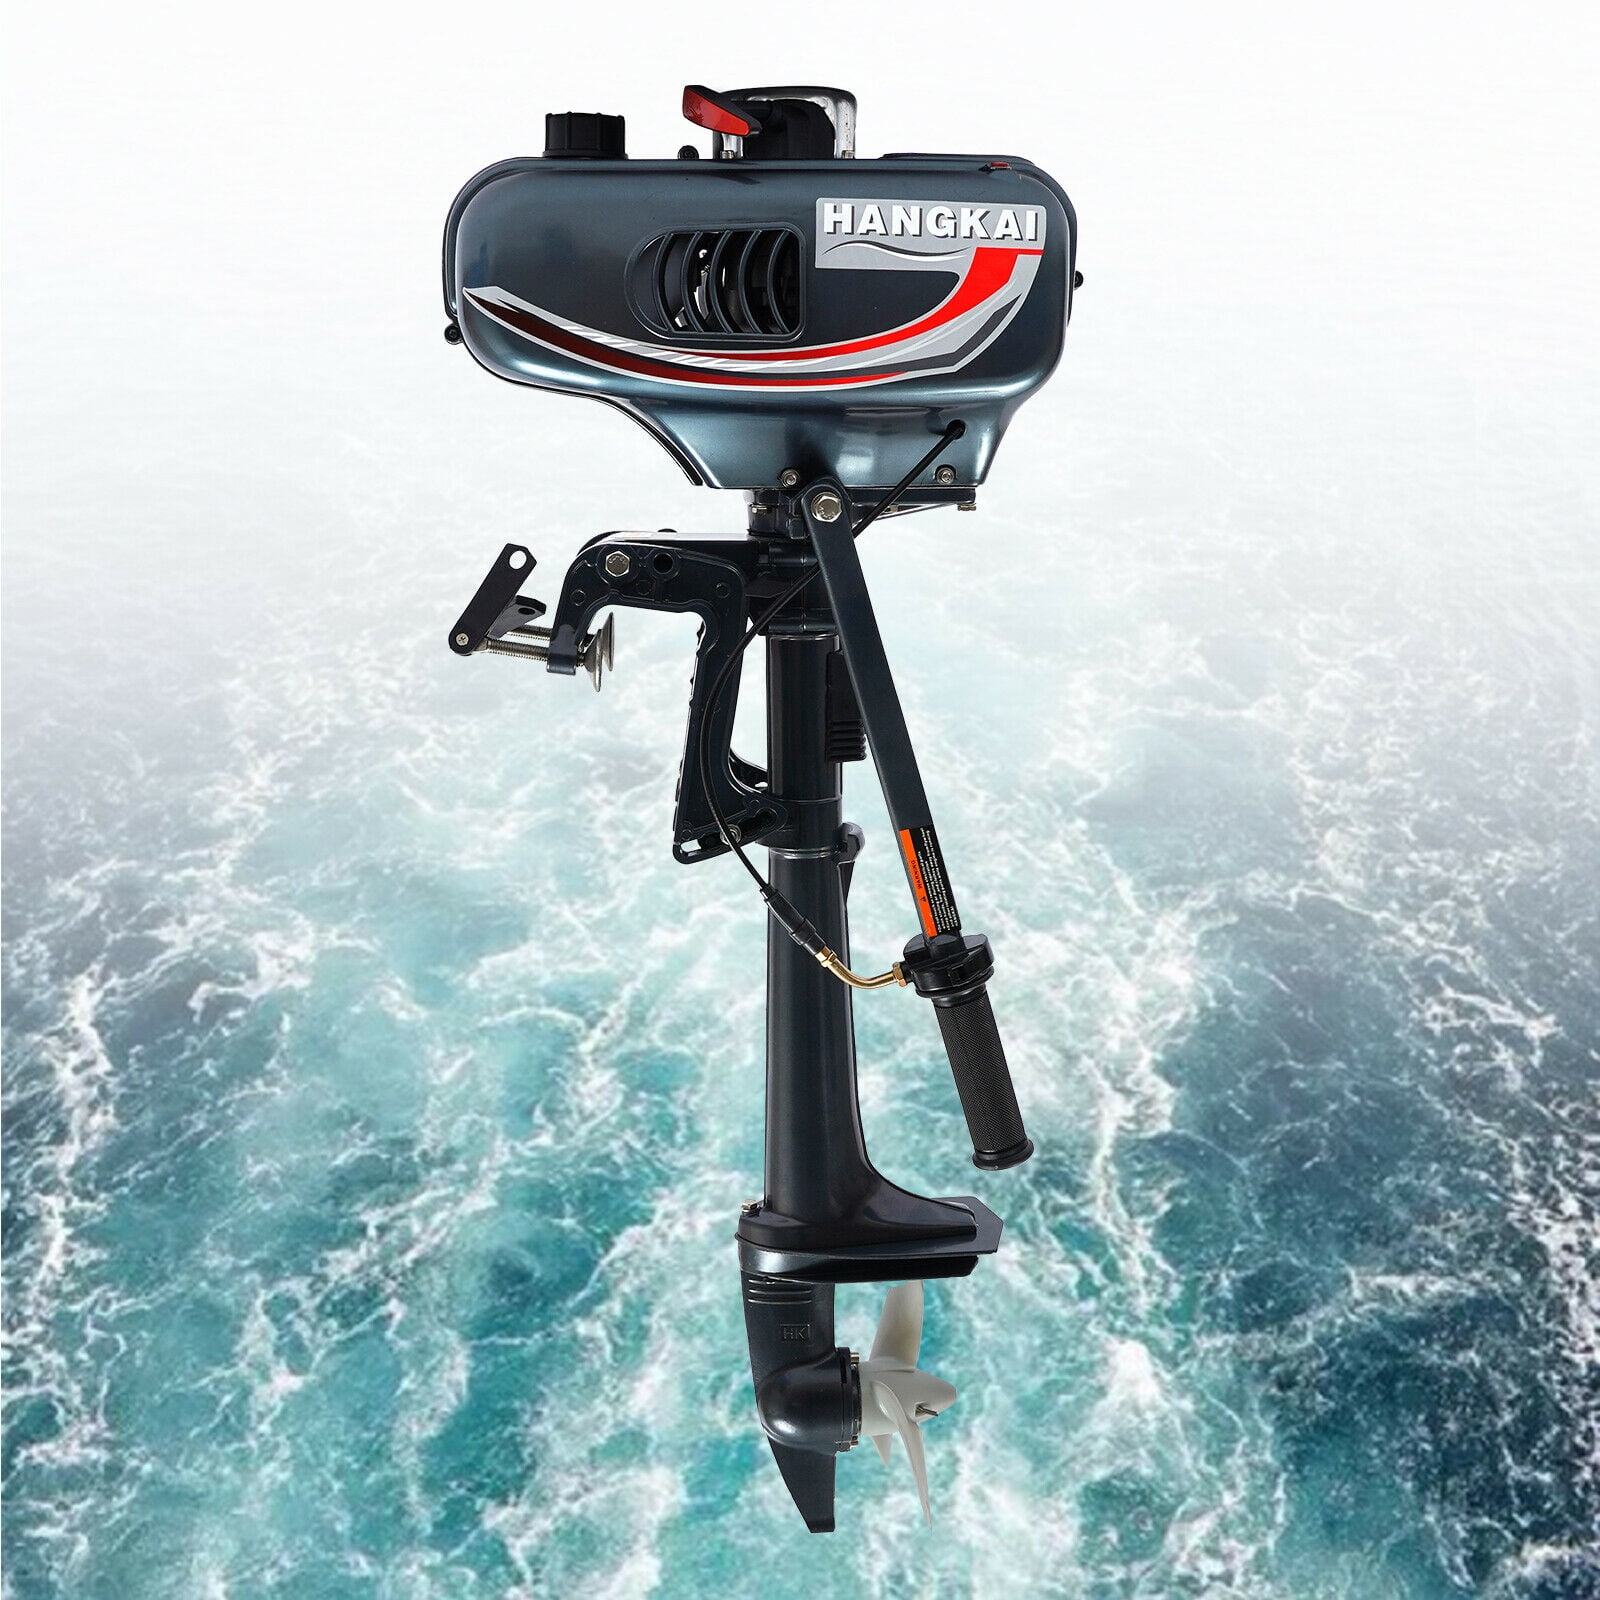 HANGKAI 2 Stroke Outboard Motor 2500W Fishing Boat Engine with CDI System 3.5HP 